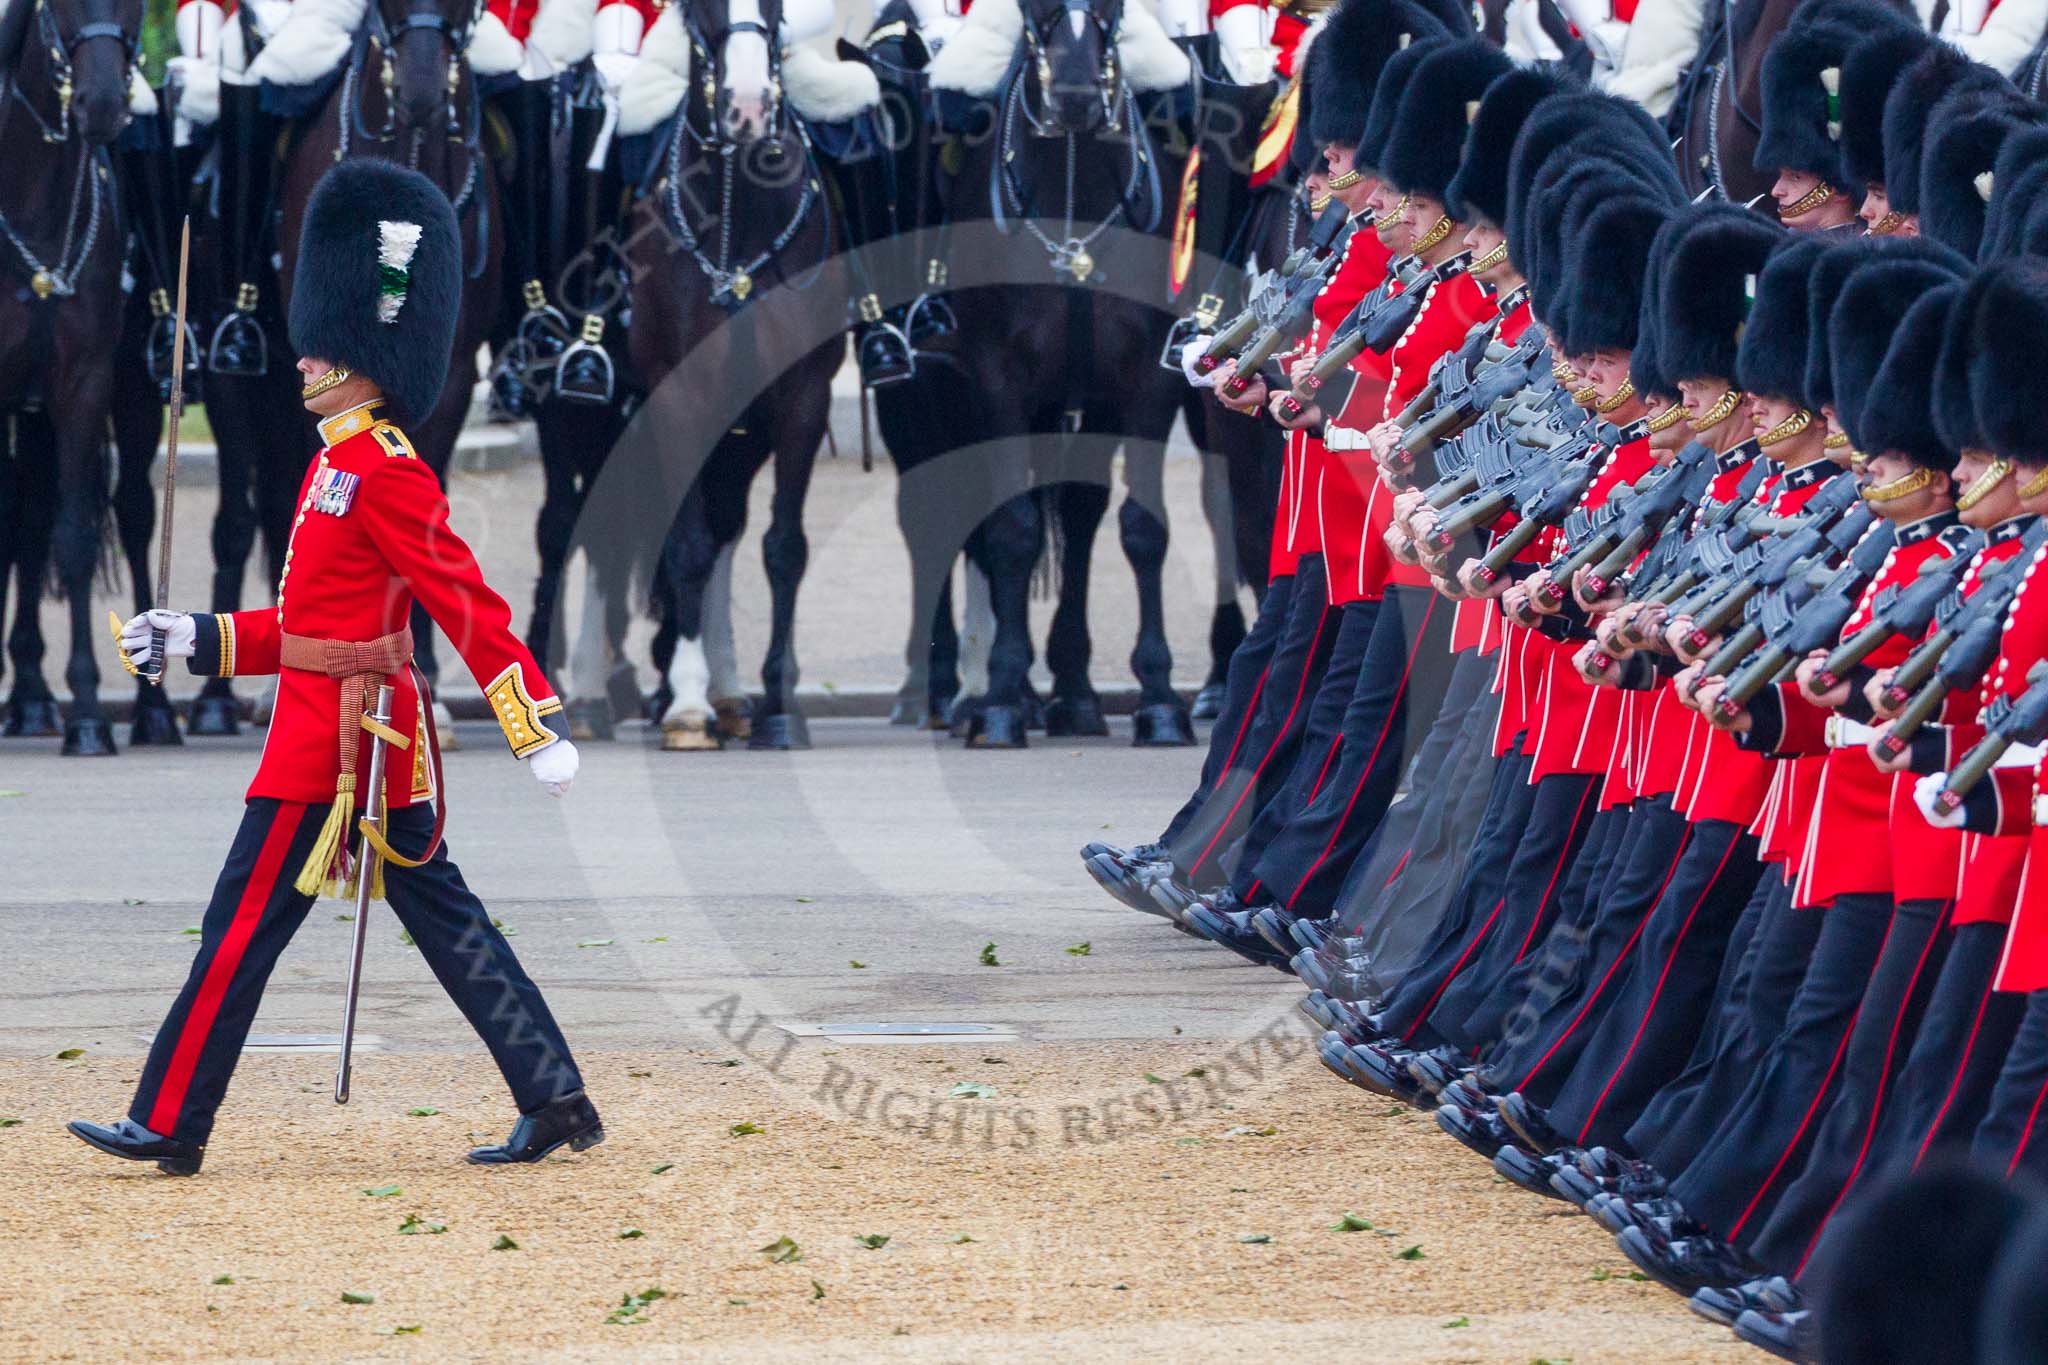 Trooping the Colour 2015. Image #490, 13 June 2015 11:41 Horse Guards Parade, London, UK